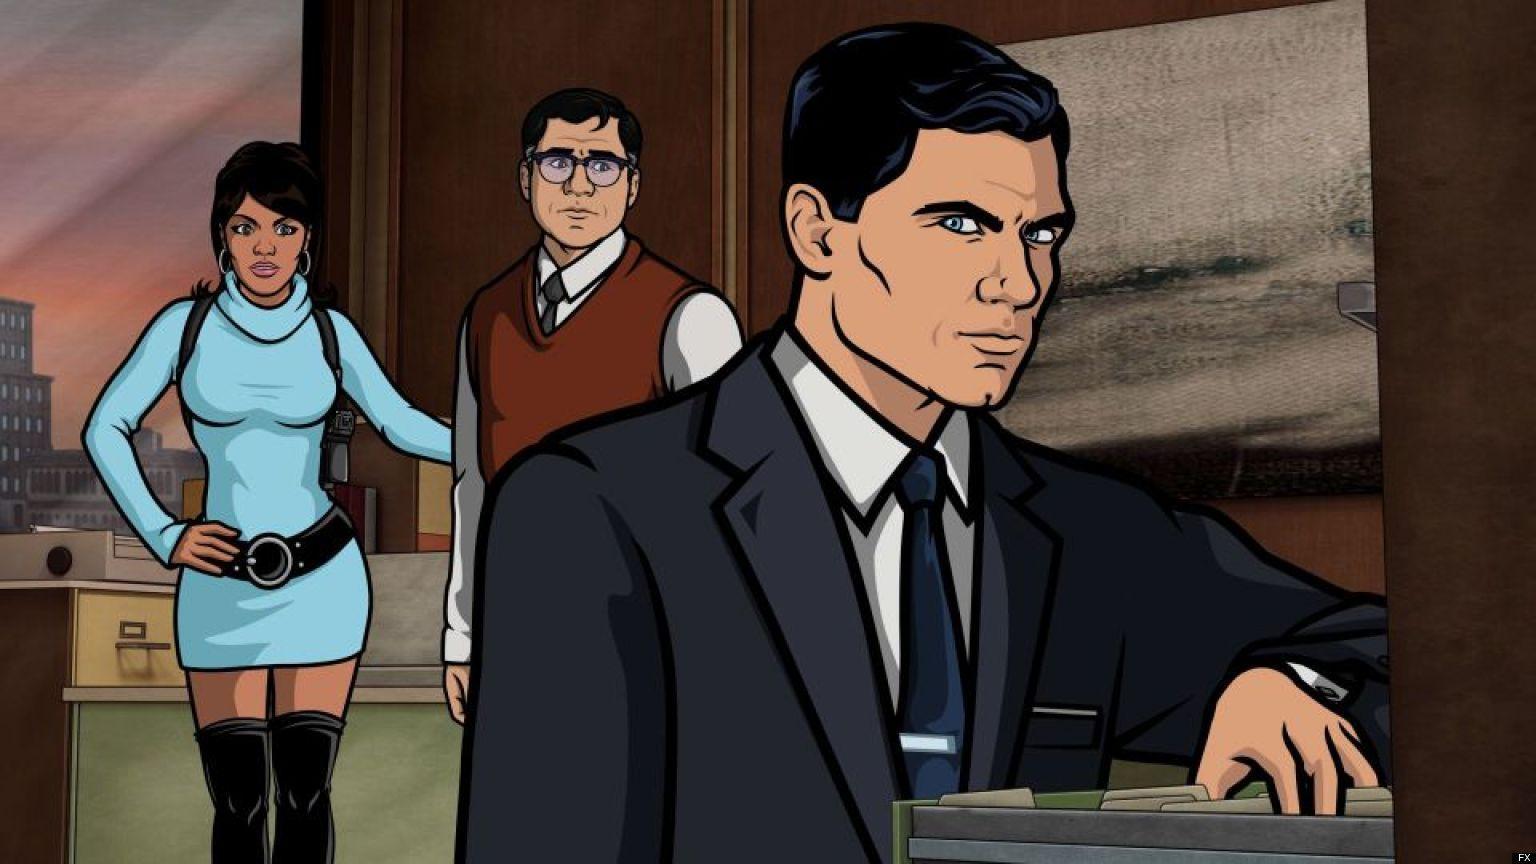 Critically lauded ‘Archer’ has just released its 11th season